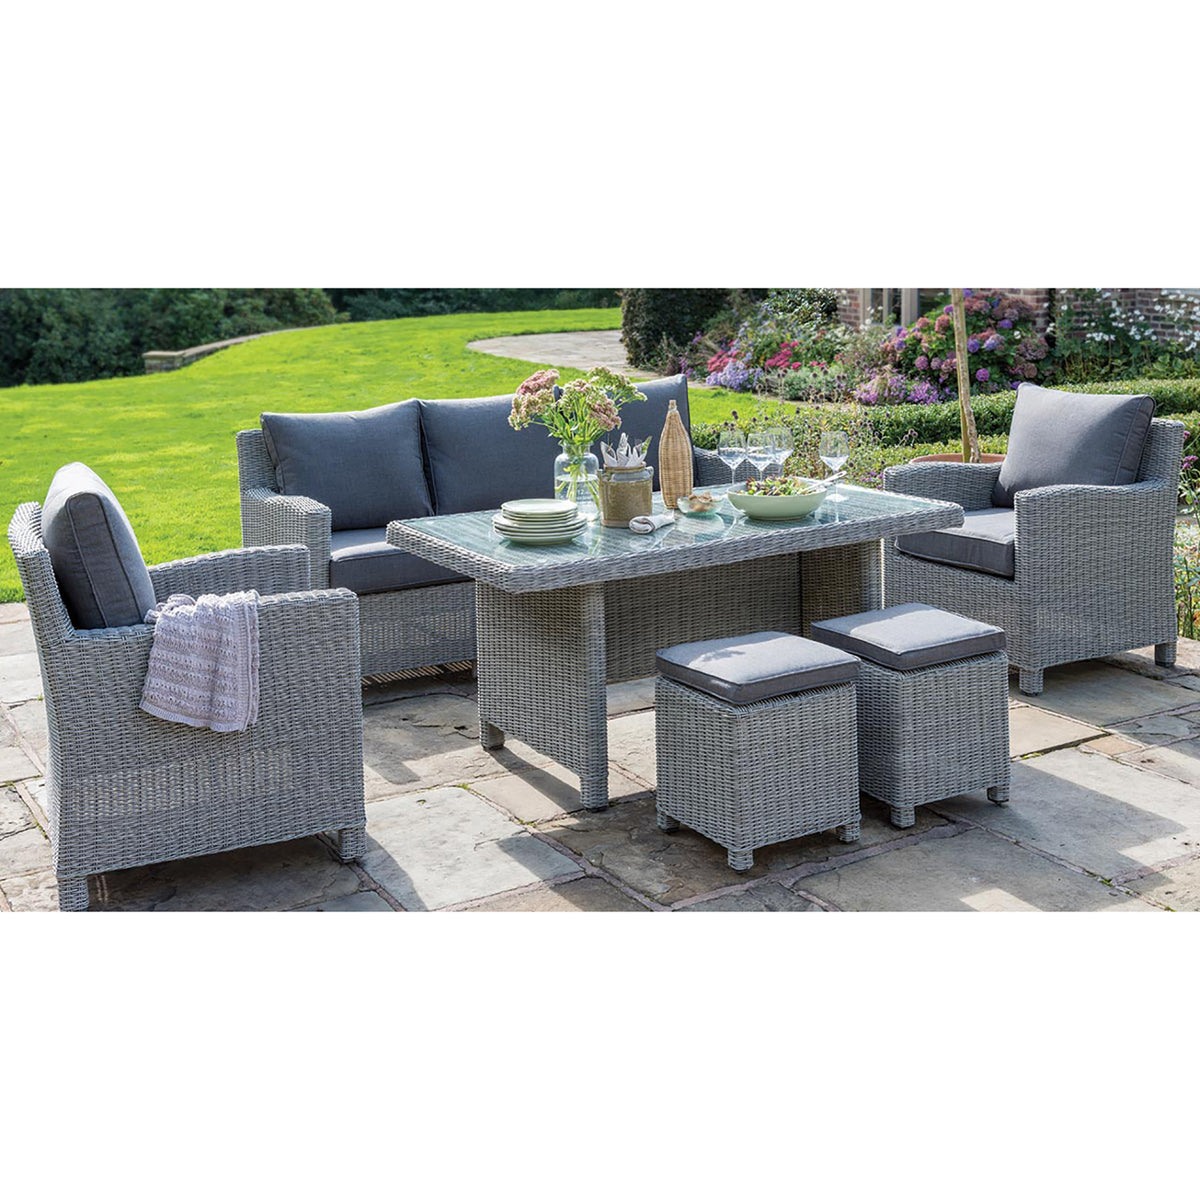 Kettler Palma White Wash Wicker Outdoor Casual Dining Lounge Sofa Set with Glass Top Table